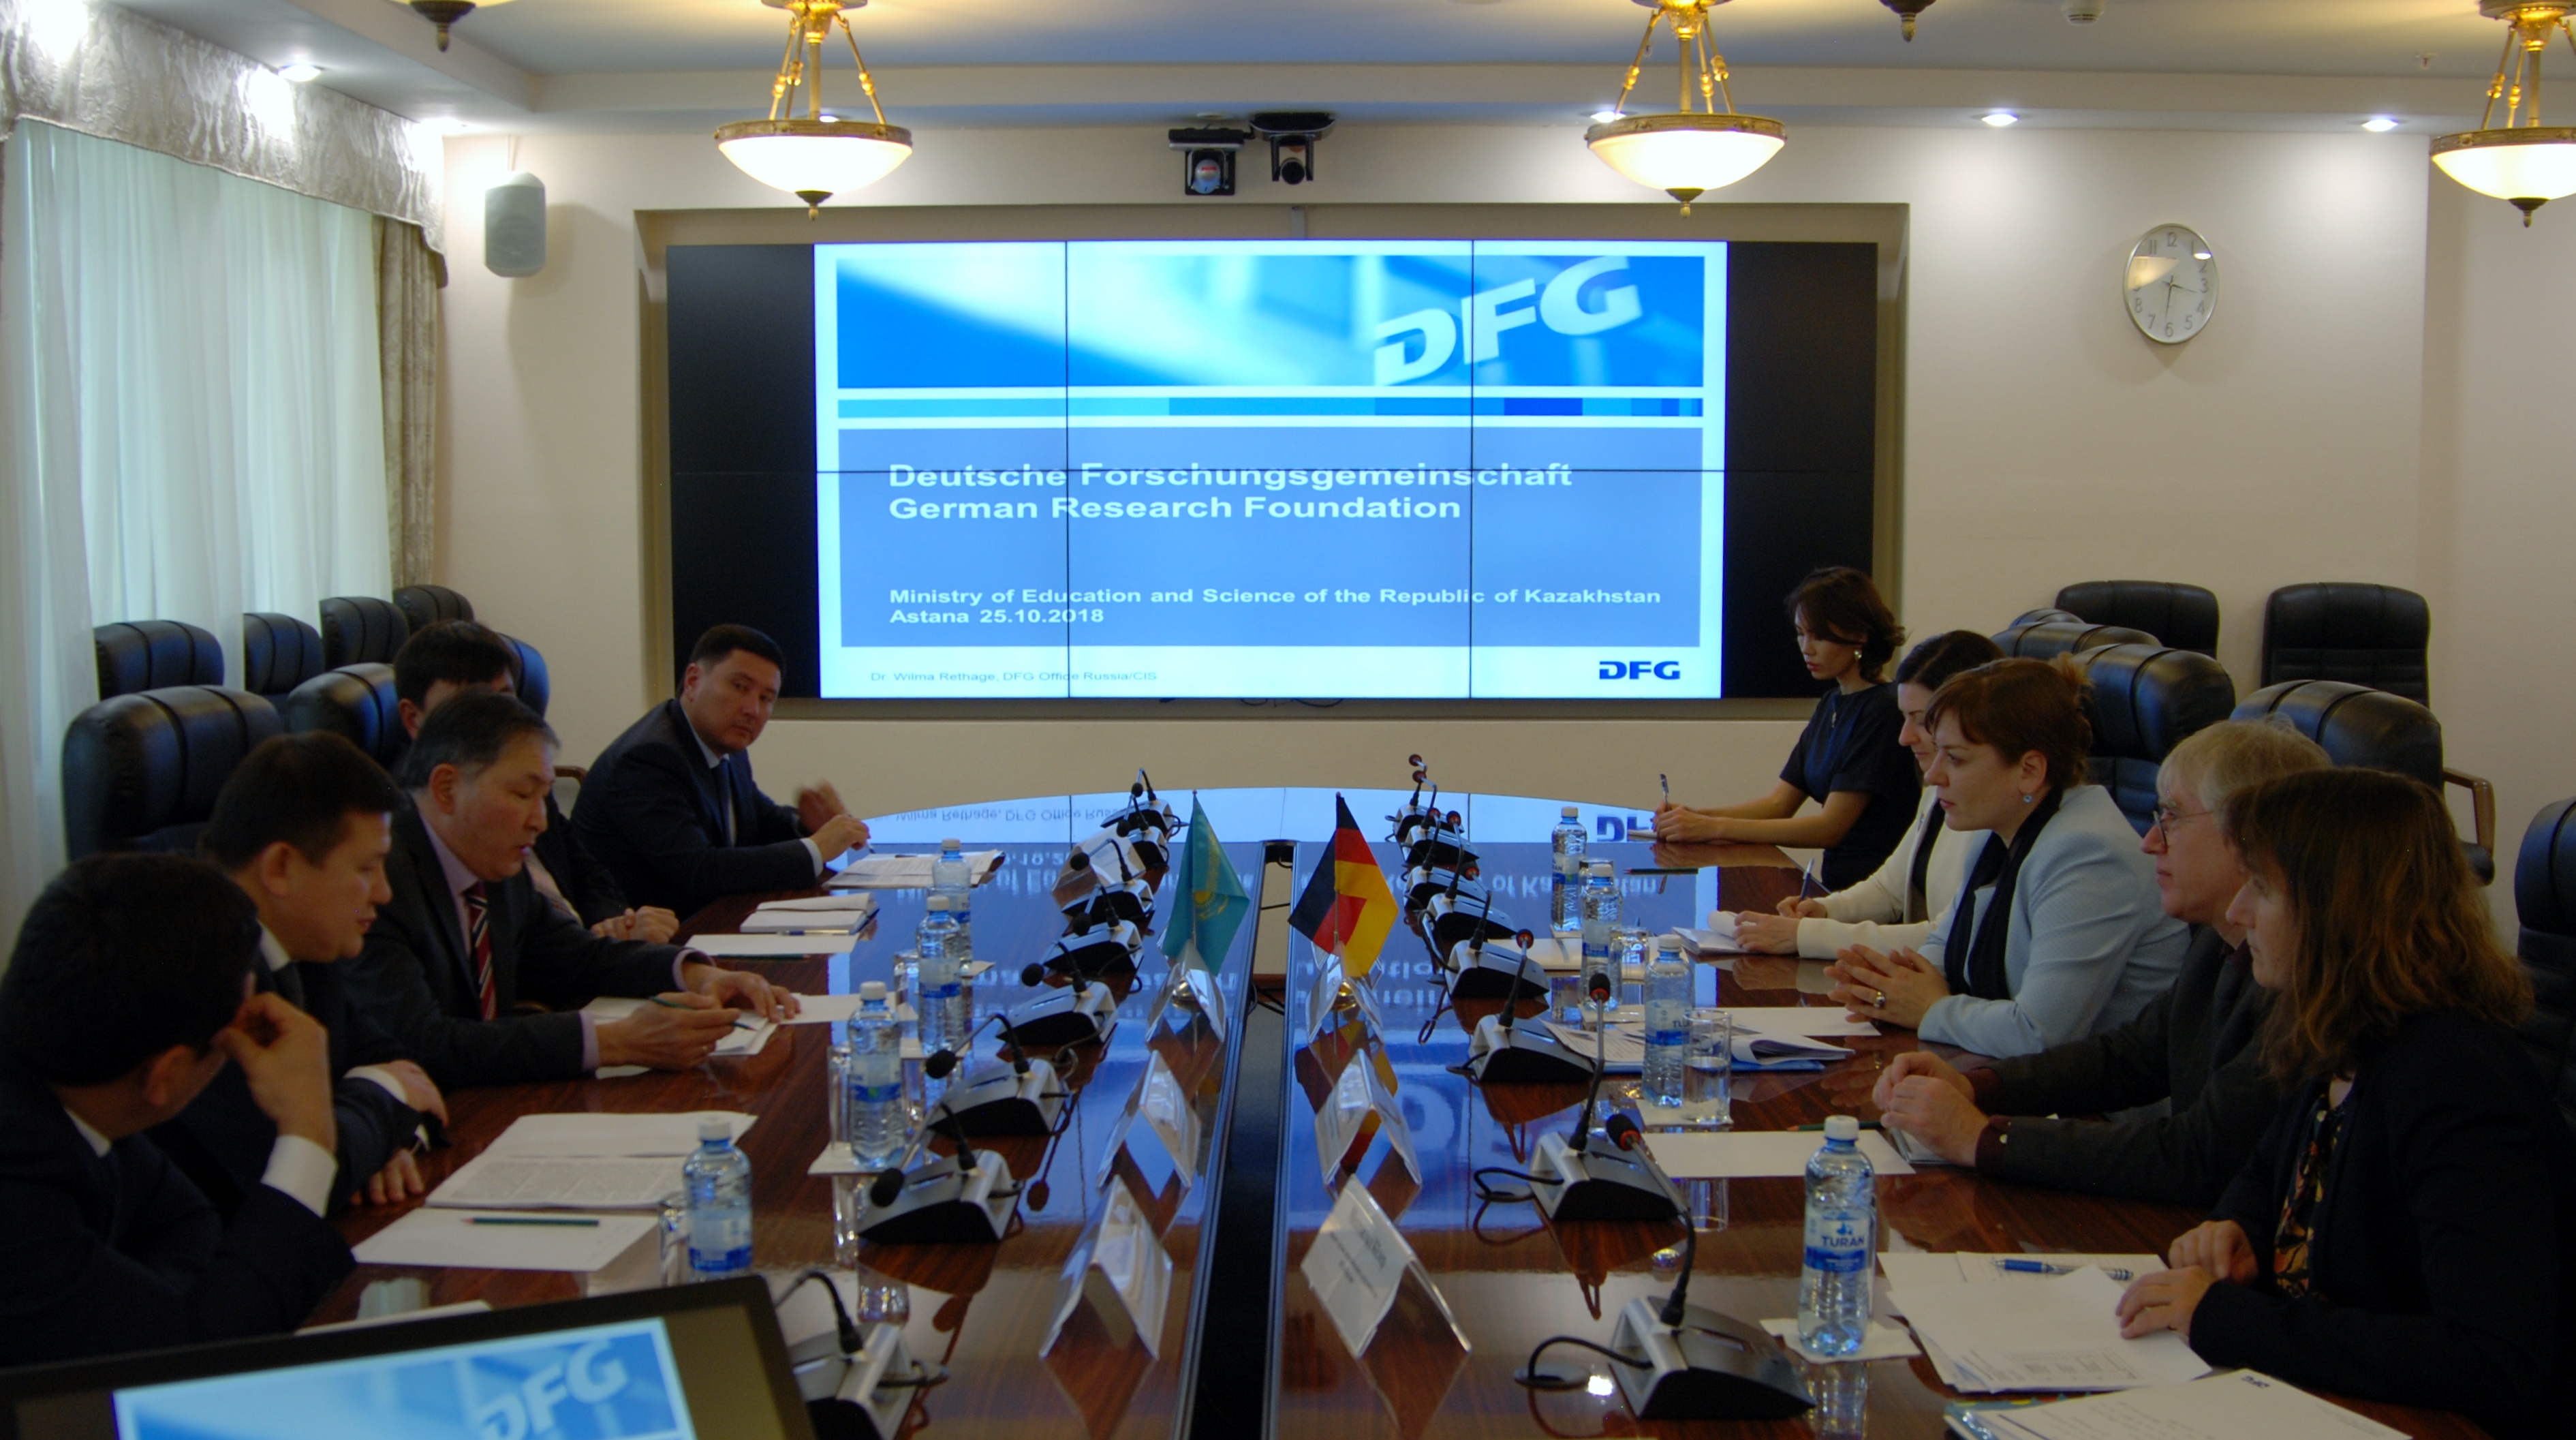 DFG delegation in conversation with the Minister for Education and Science of the Republic of Kazakhstan, Astana